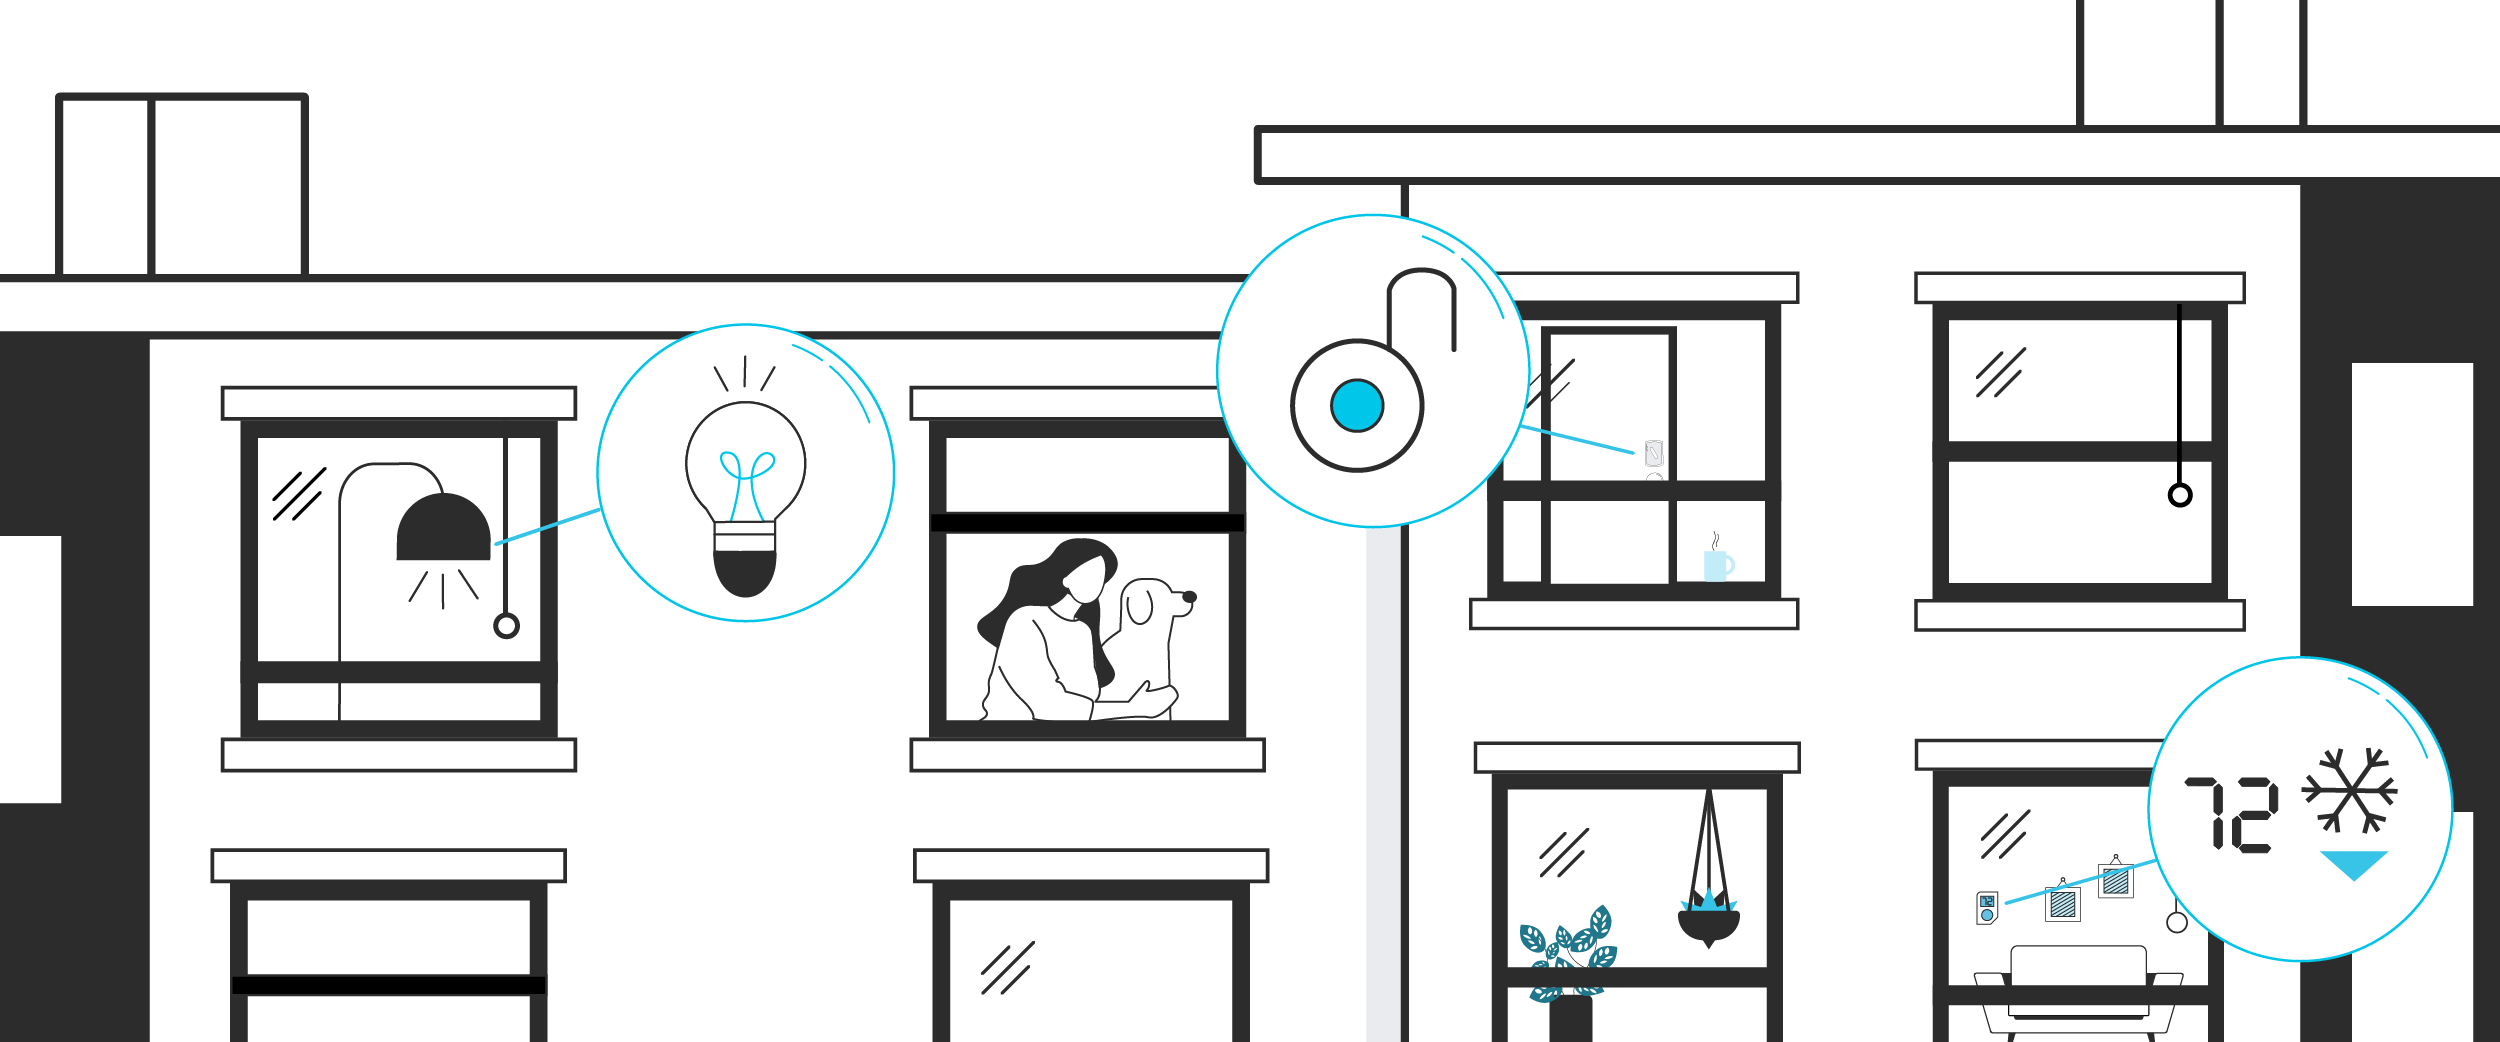 A smart hub, Quext IoT thermostat, connecting several devices across an apartment unit.